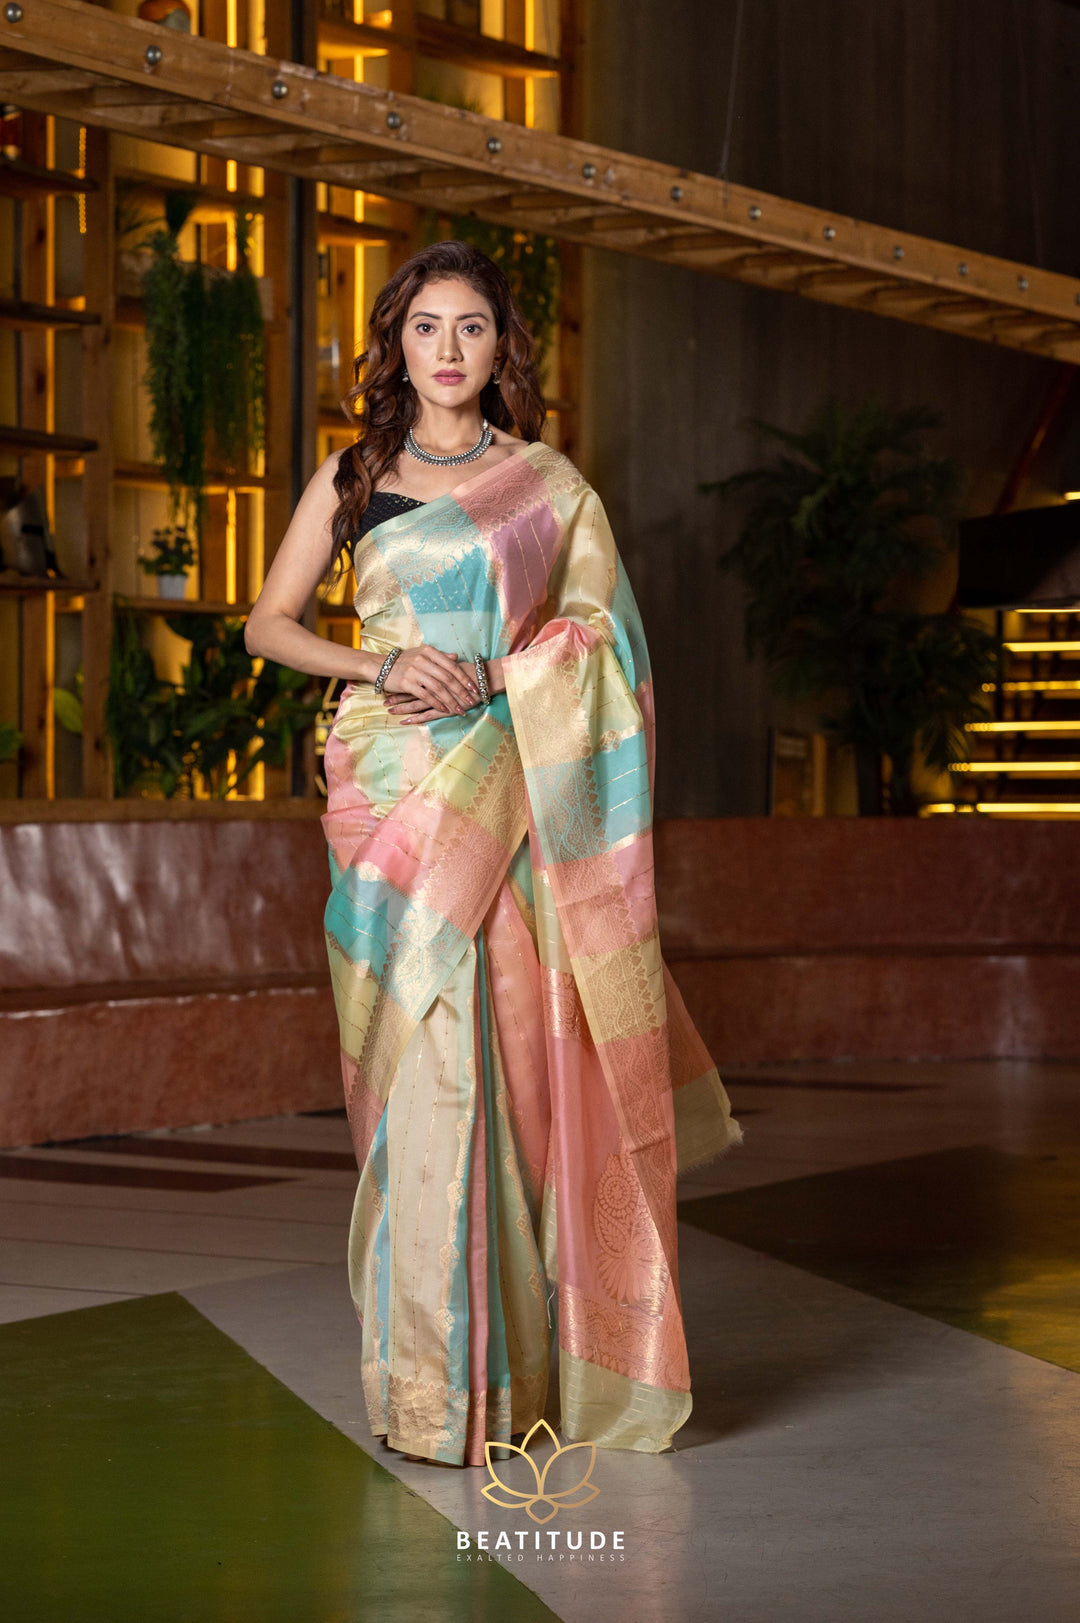 Beatitude Multi-Coloured Yellow Ethnic Motifs Organza Saree with Unstitched Blouse